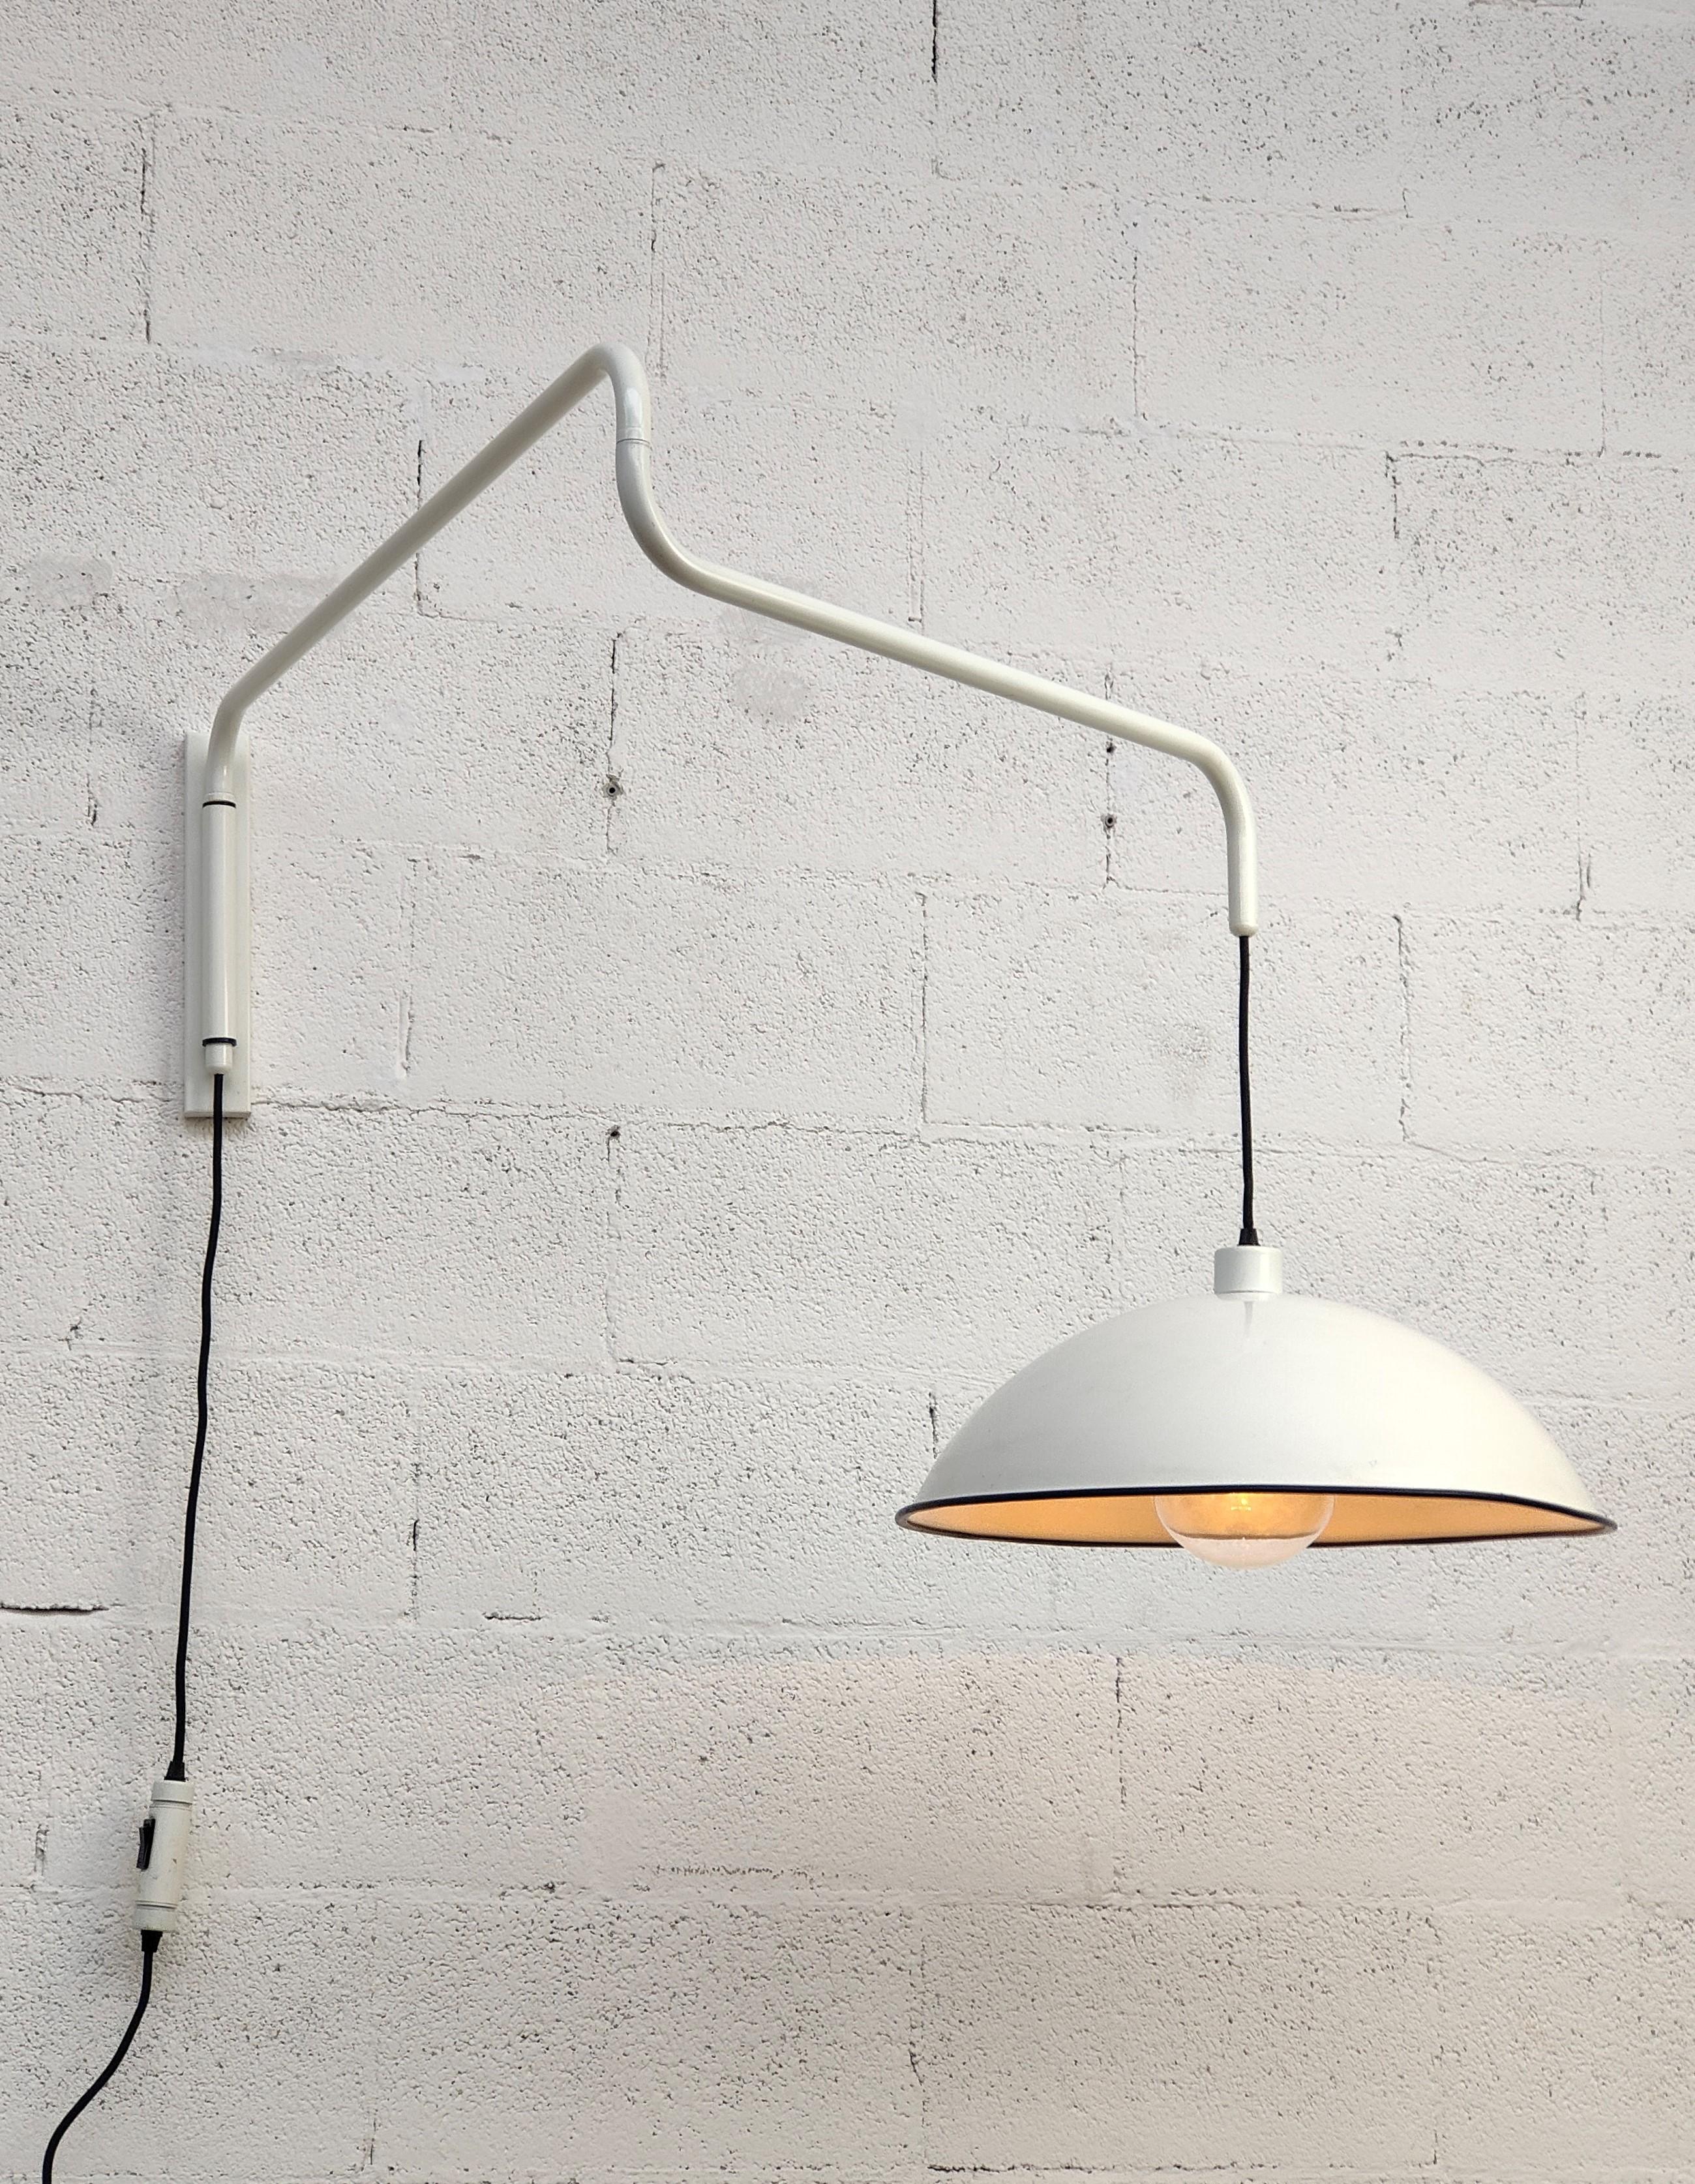 Metal Height Adjustable, Swiveling Wall Lamp by Elio Martinelli 60s, 70s